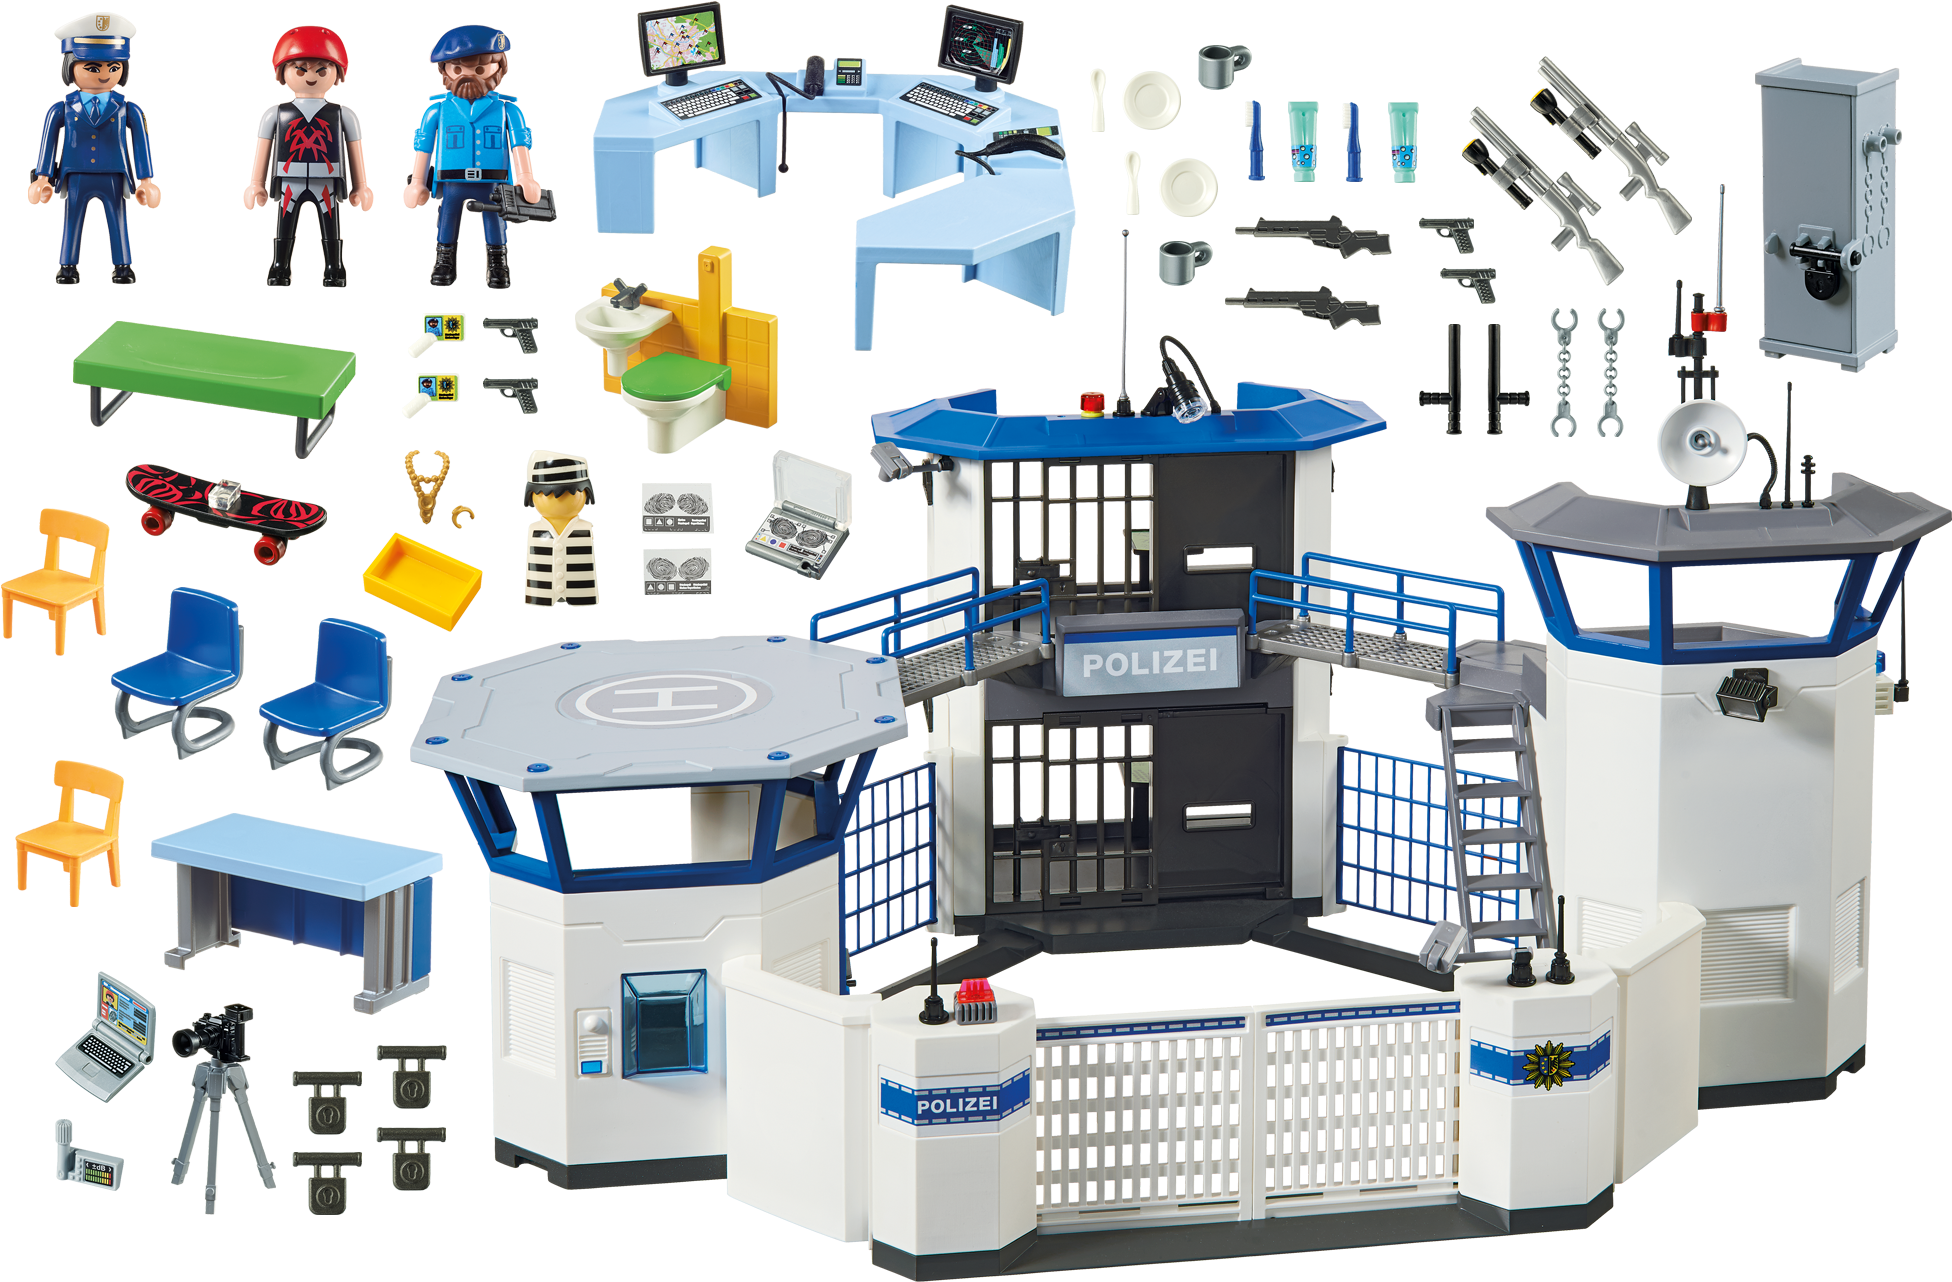 Http - //media - Playmobil - Com/i/playmobil/6872 Product - Playmobil 6872 Police Command Center With Prison (2000x1400)